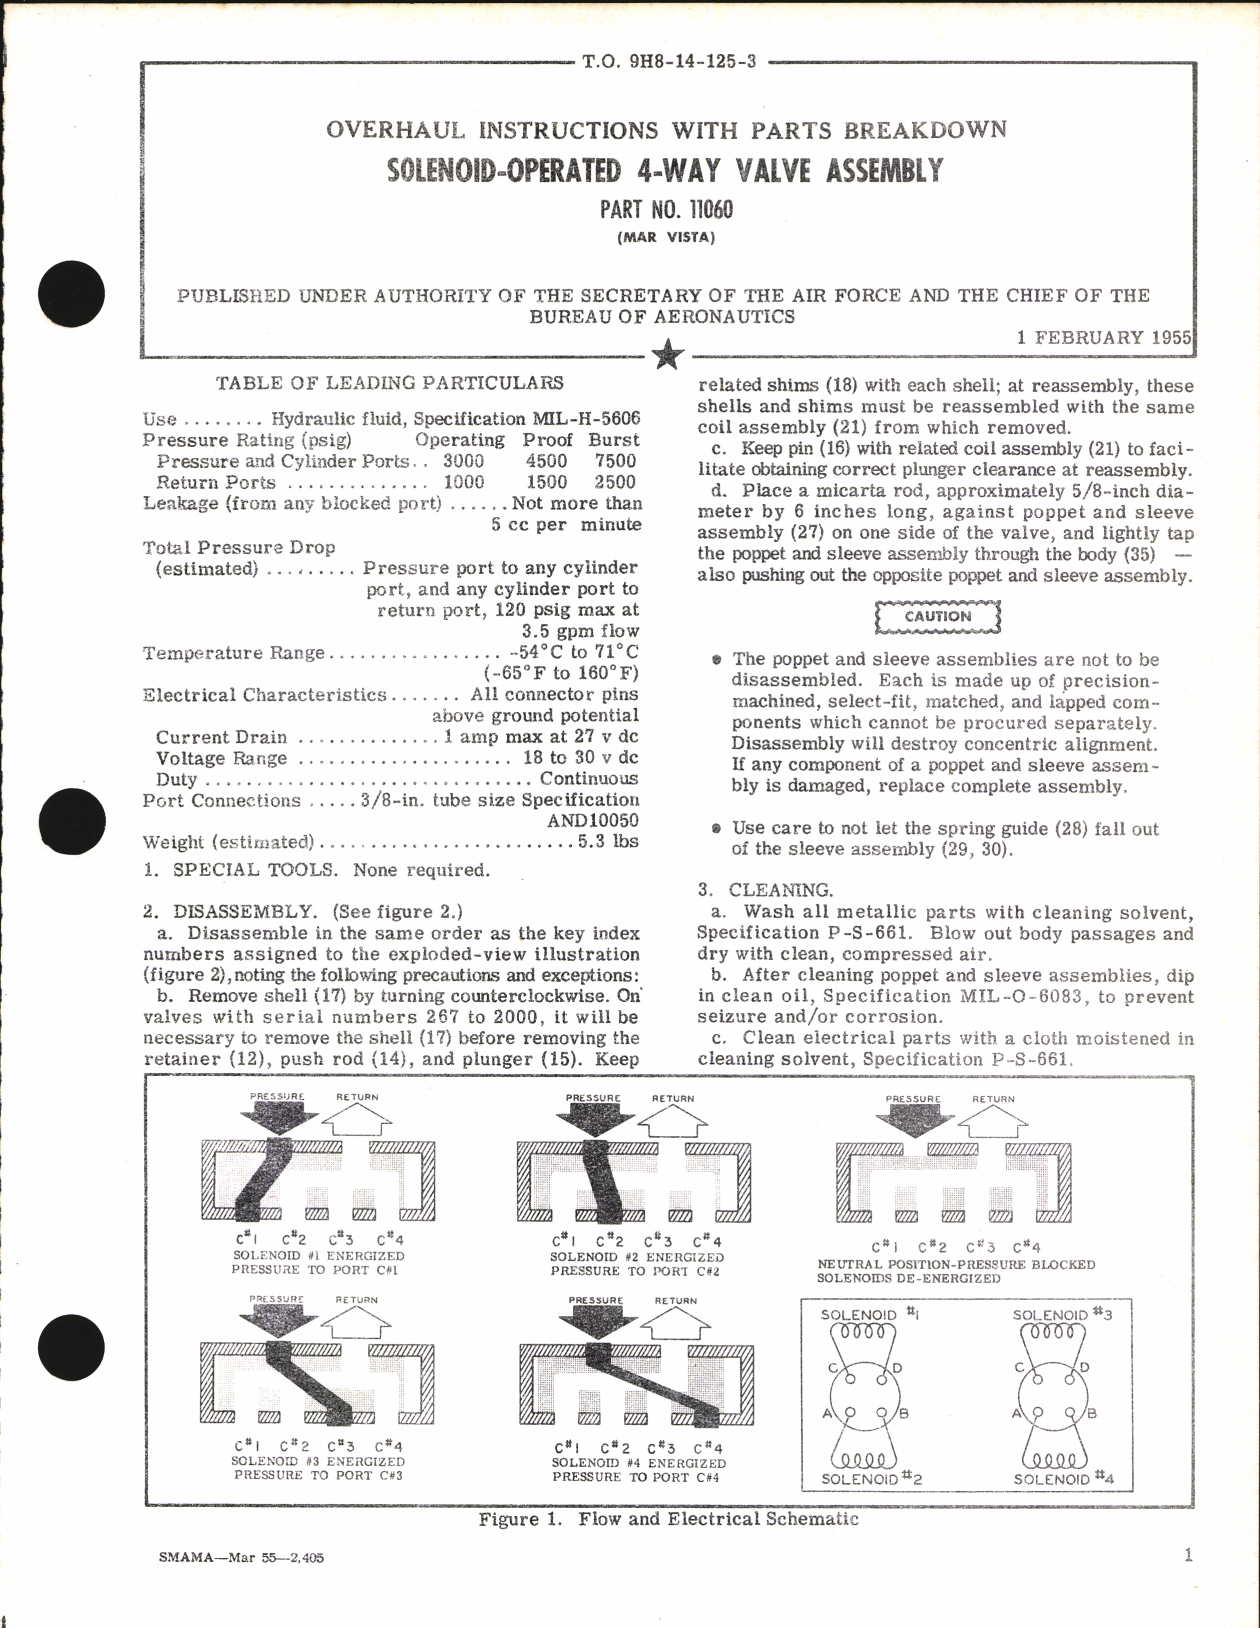 Sample page 1 from AirCorps Library document: Overhaul Instructions with Parts Breakdown for Solenoid-Operated 4-Way Valve Assembly Part No. 11060 